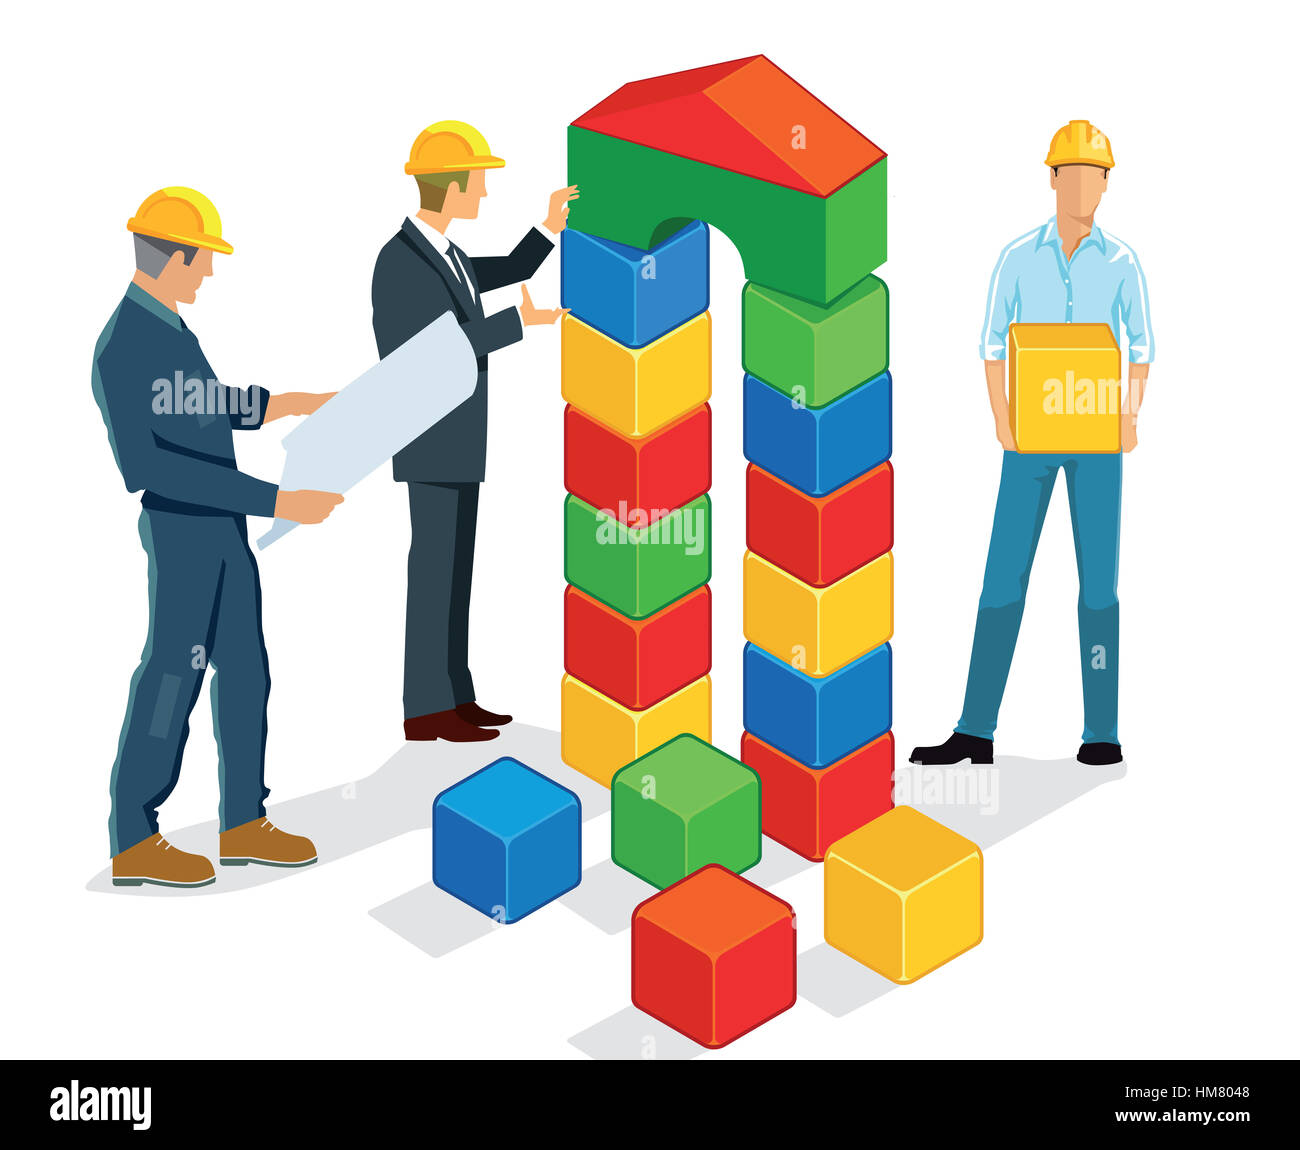 Planning and building with building blocks Stock Photo